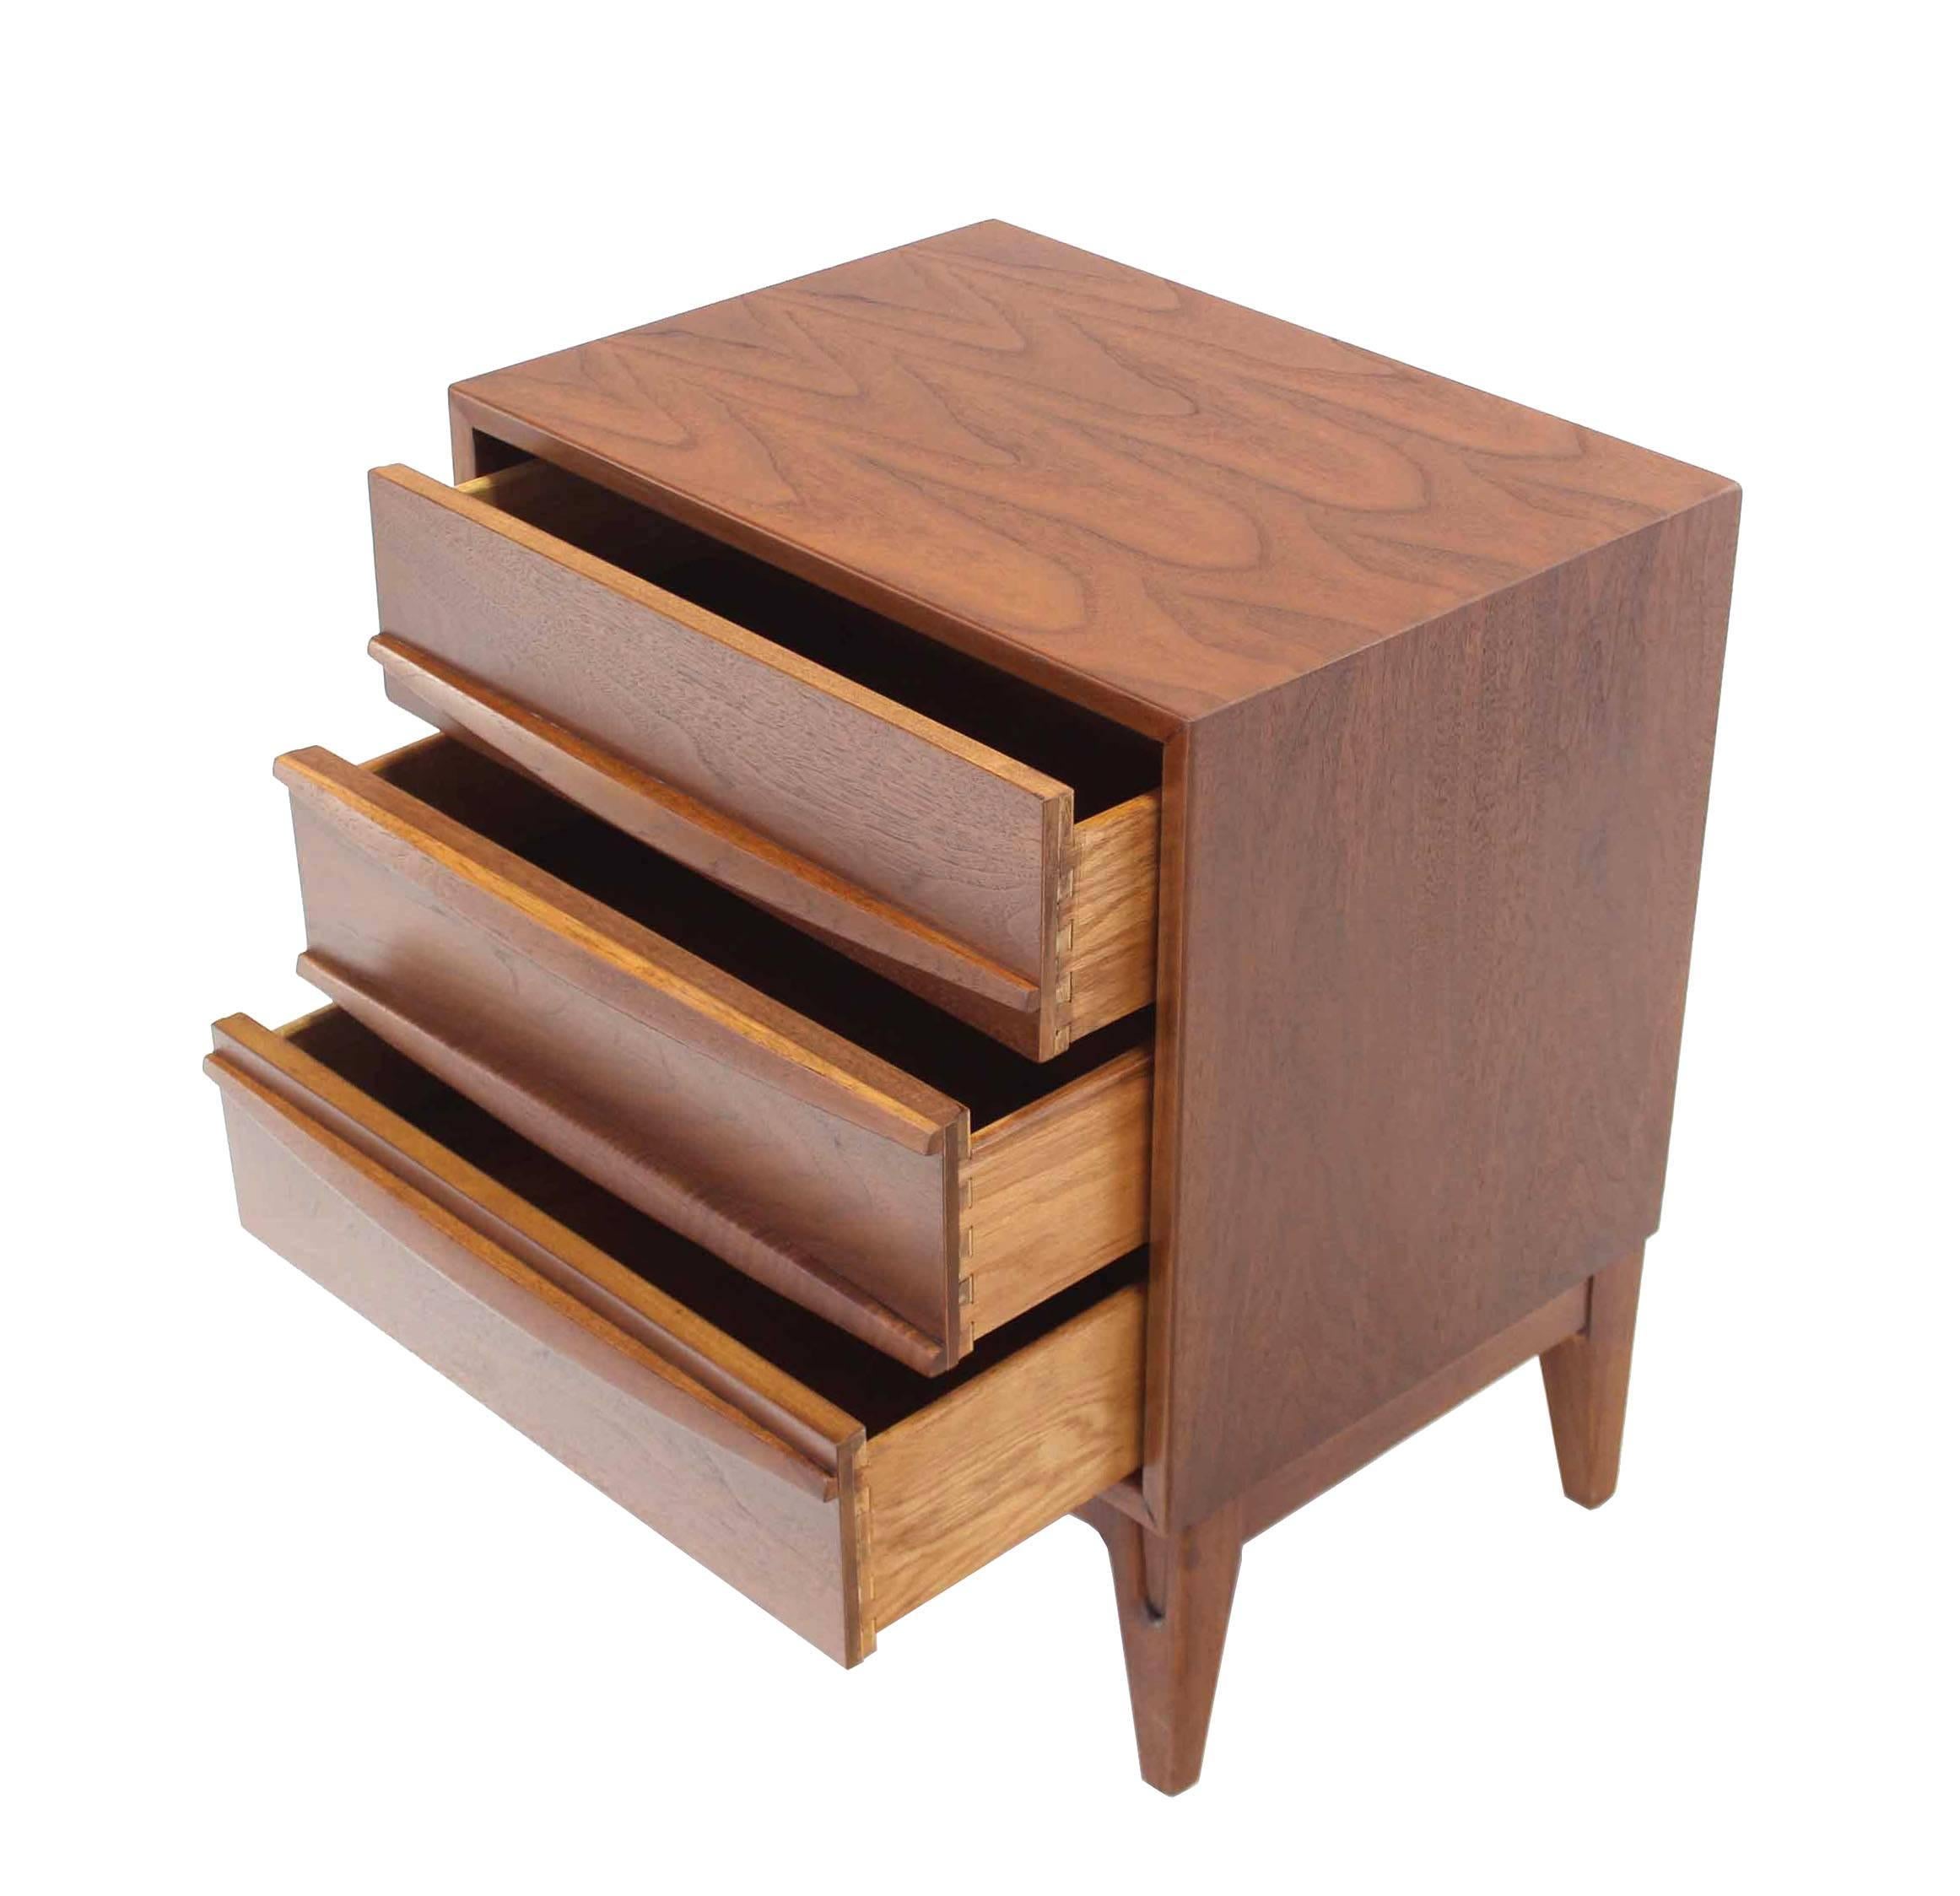 Pair of very nice mid century modern walnut 3 drawer nightstands with sculptured pulls and legs.